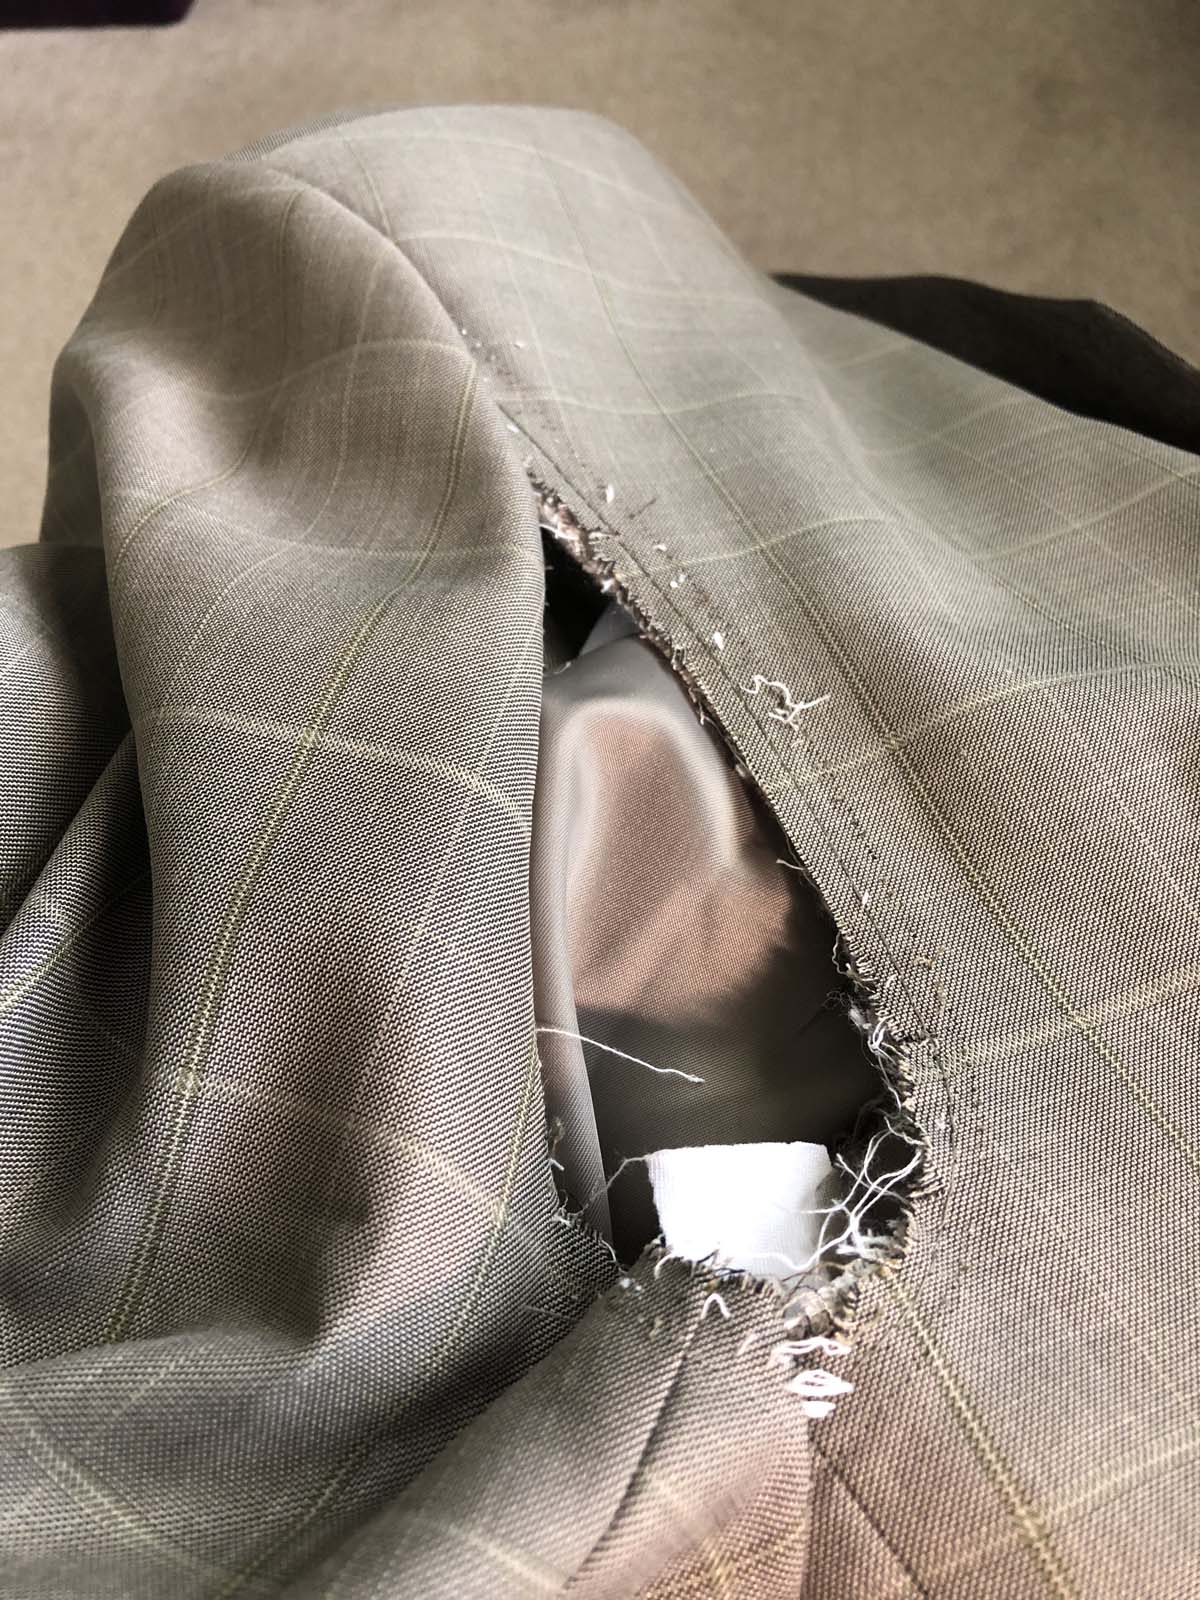 Removing the sleeve on the original men's suit